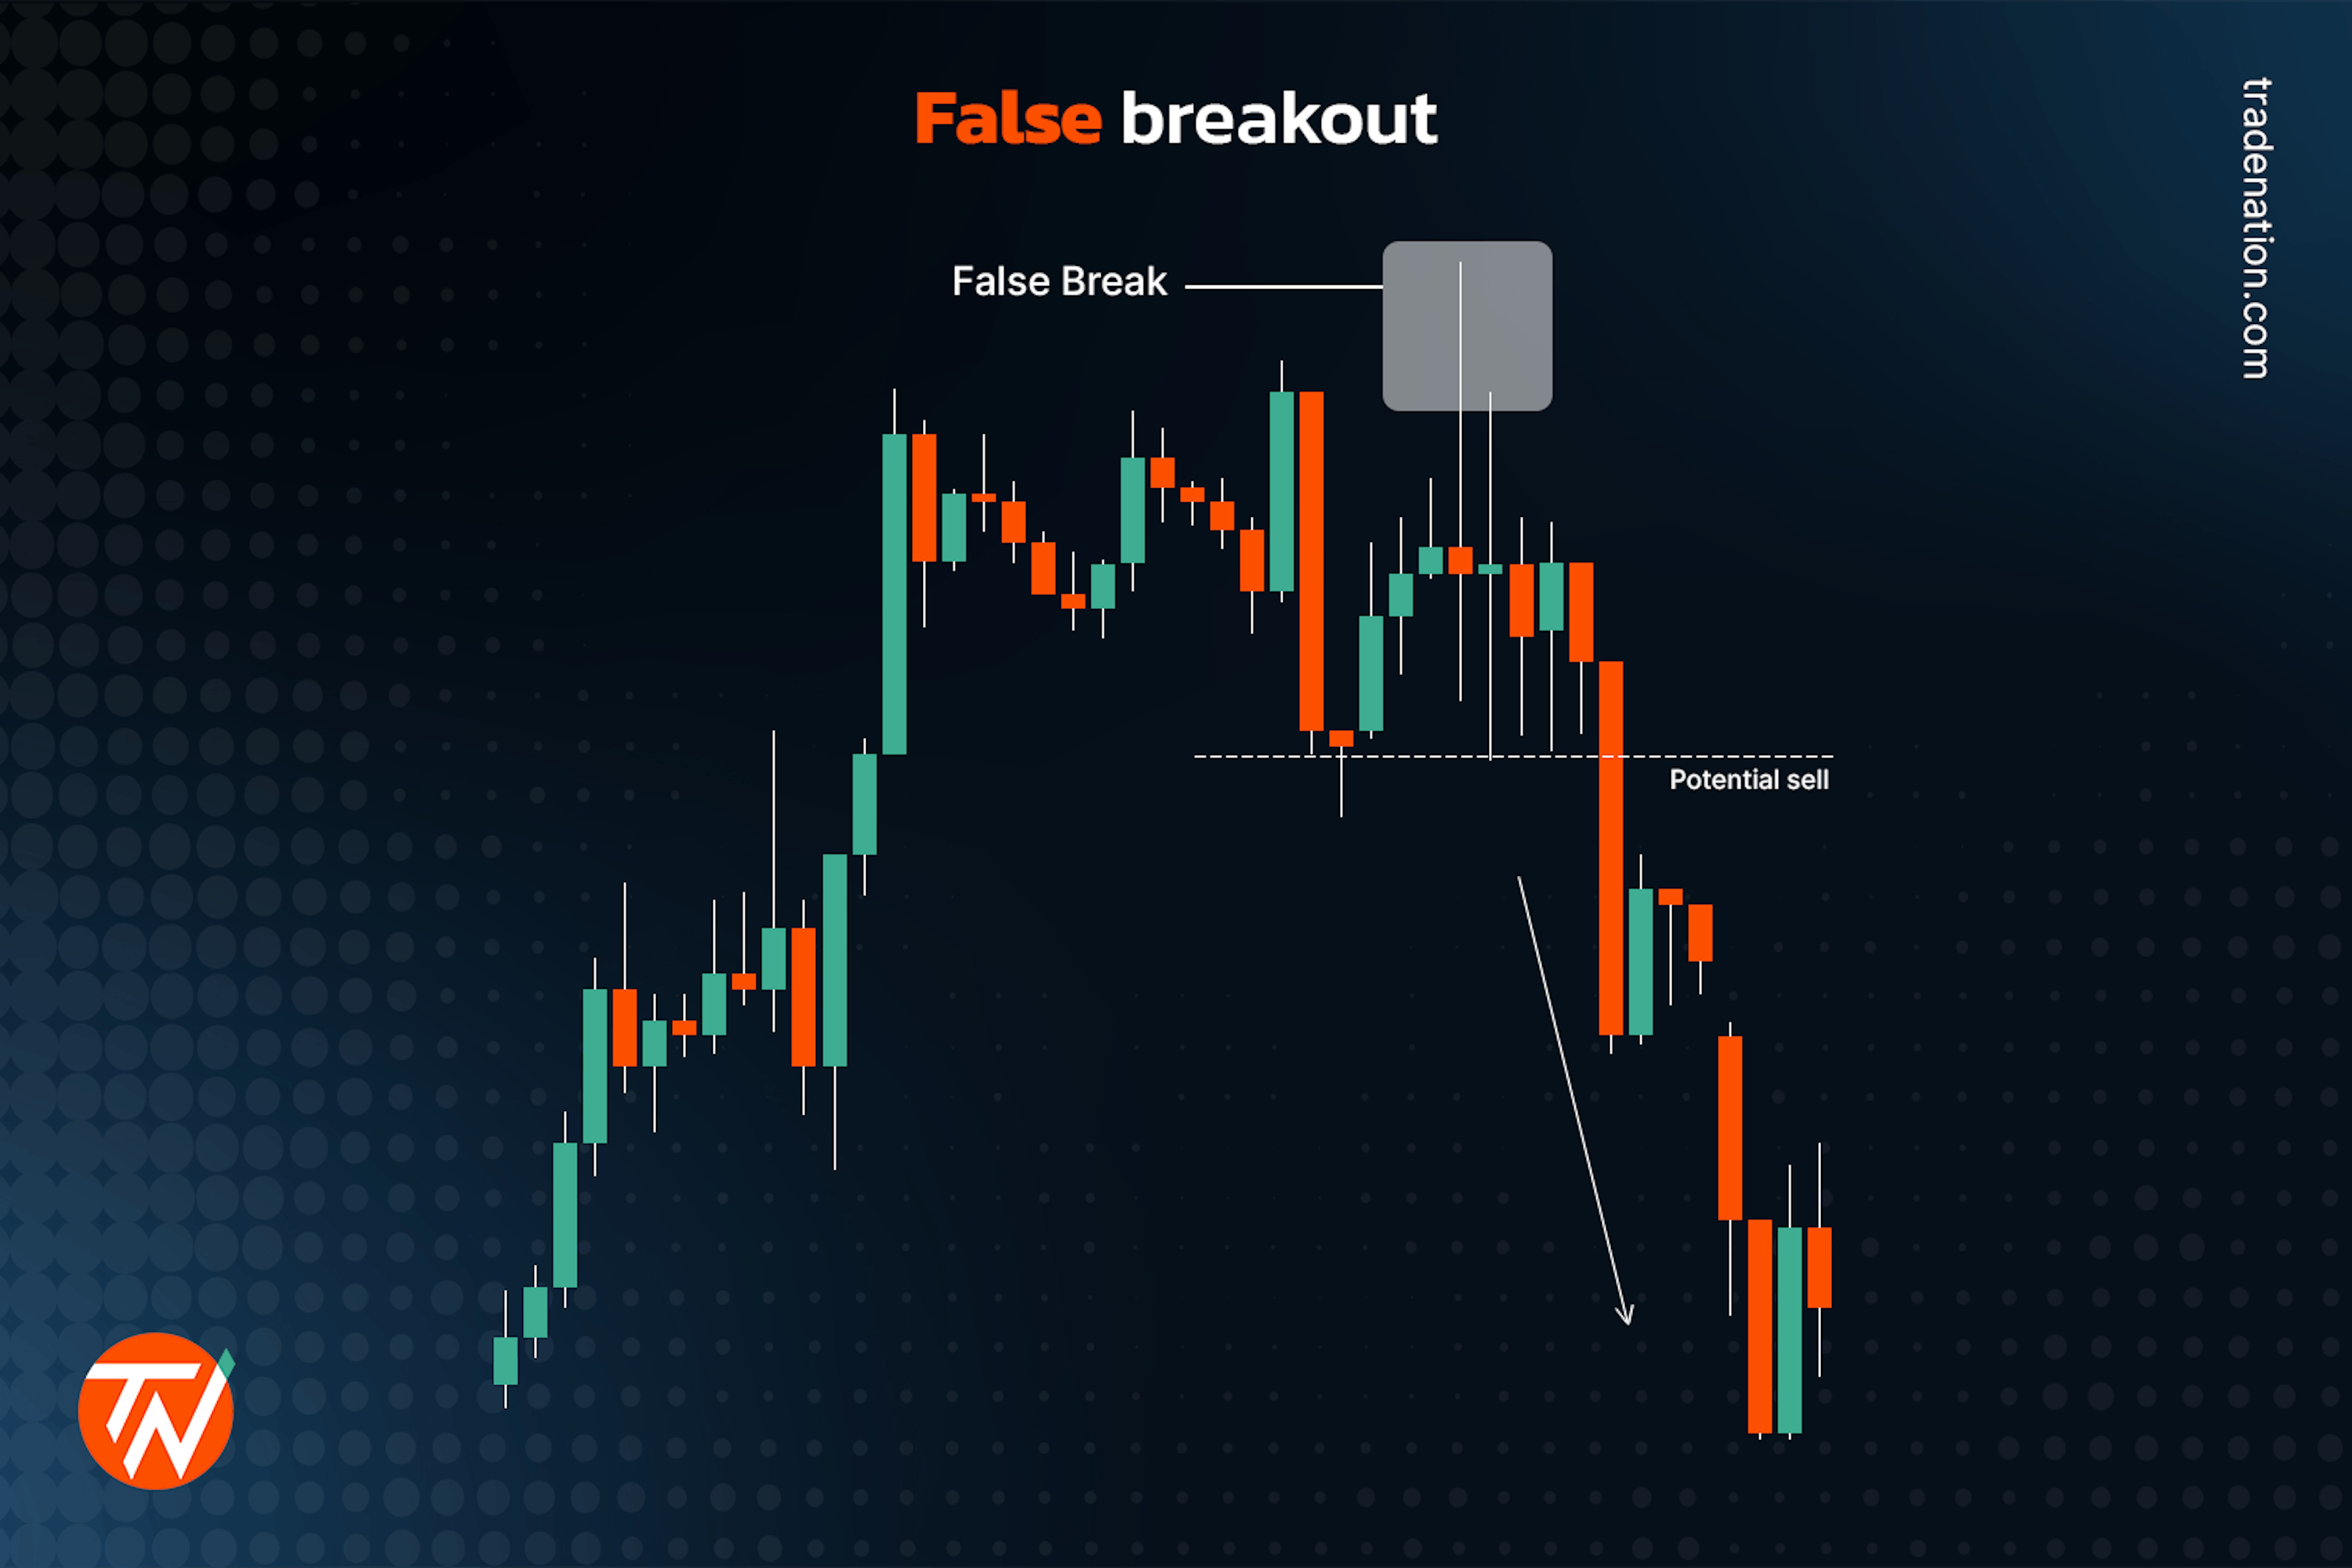 Demonstrating a false breakout in trading